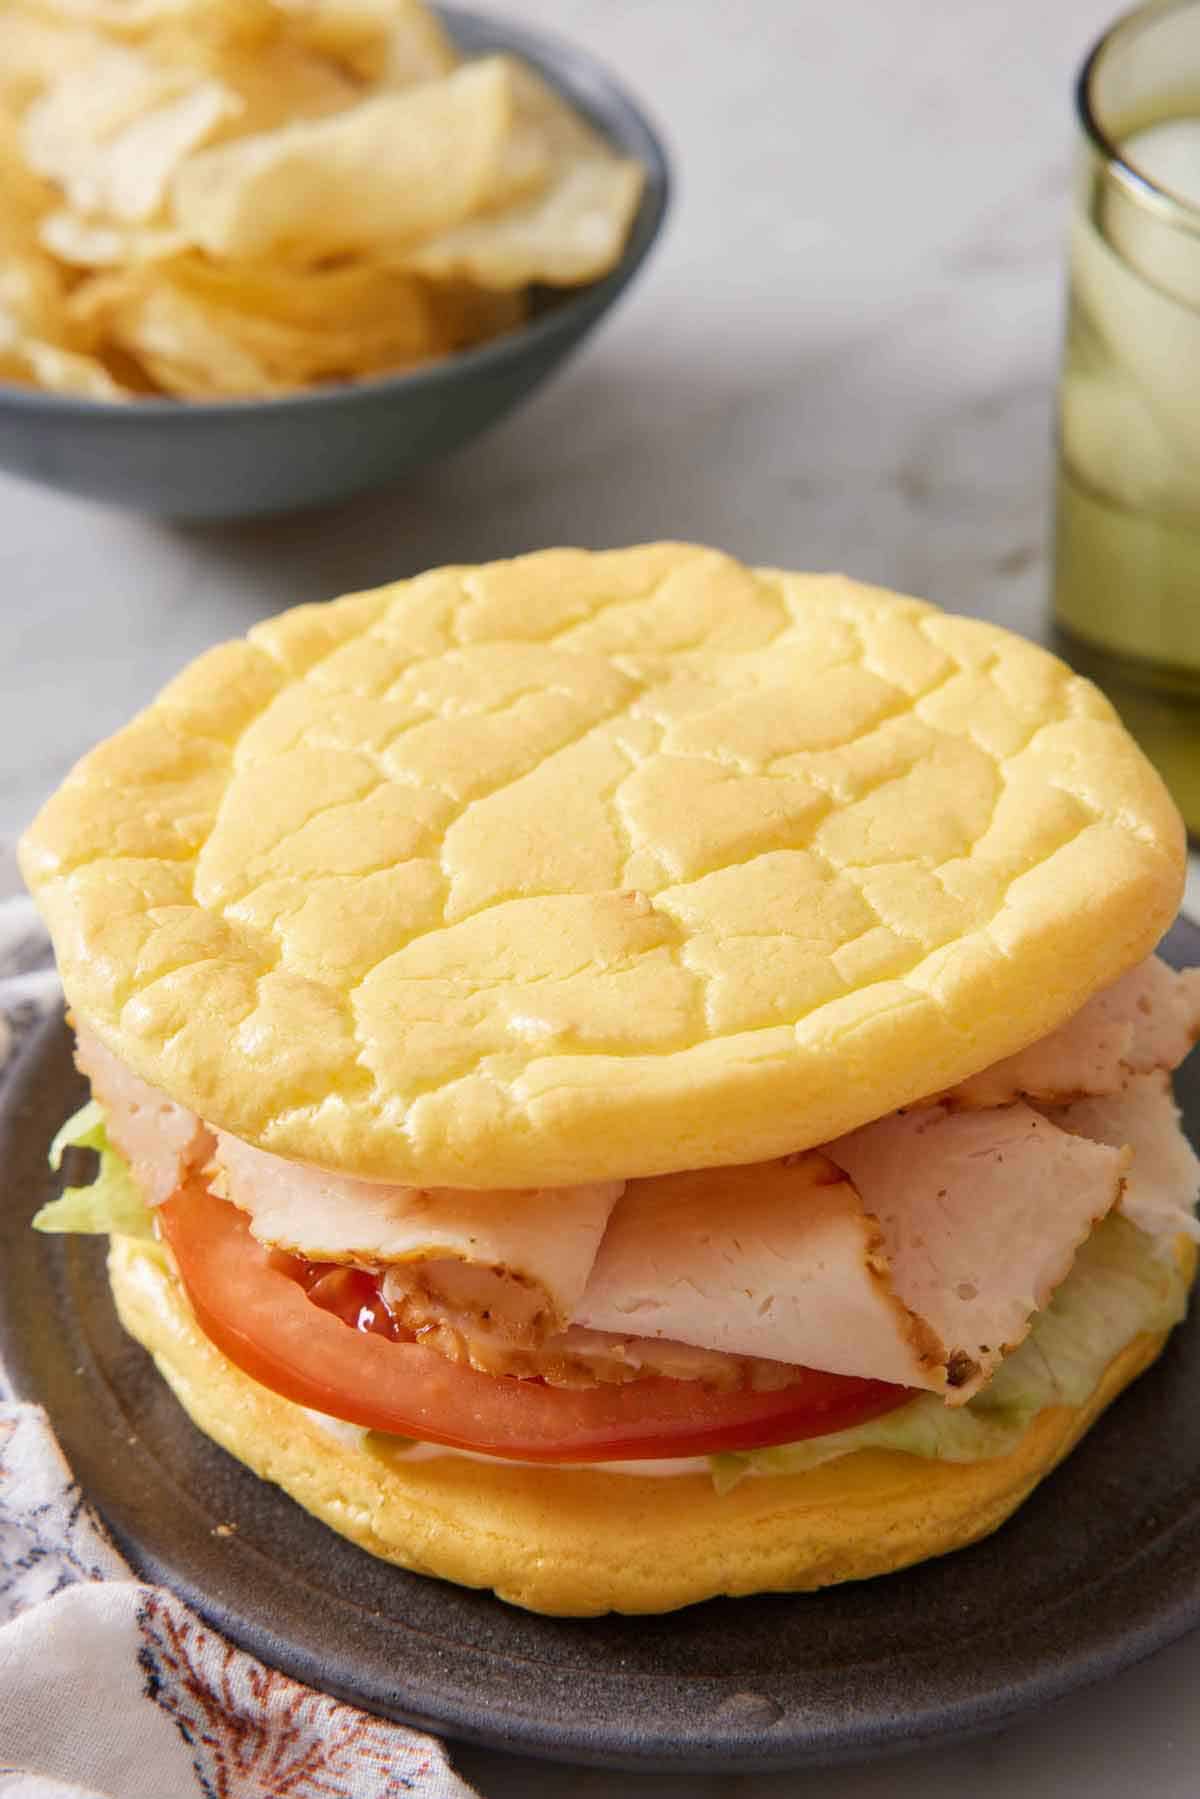 A plate with a sandwich made with cloud bread. A bowl of chips in the background.